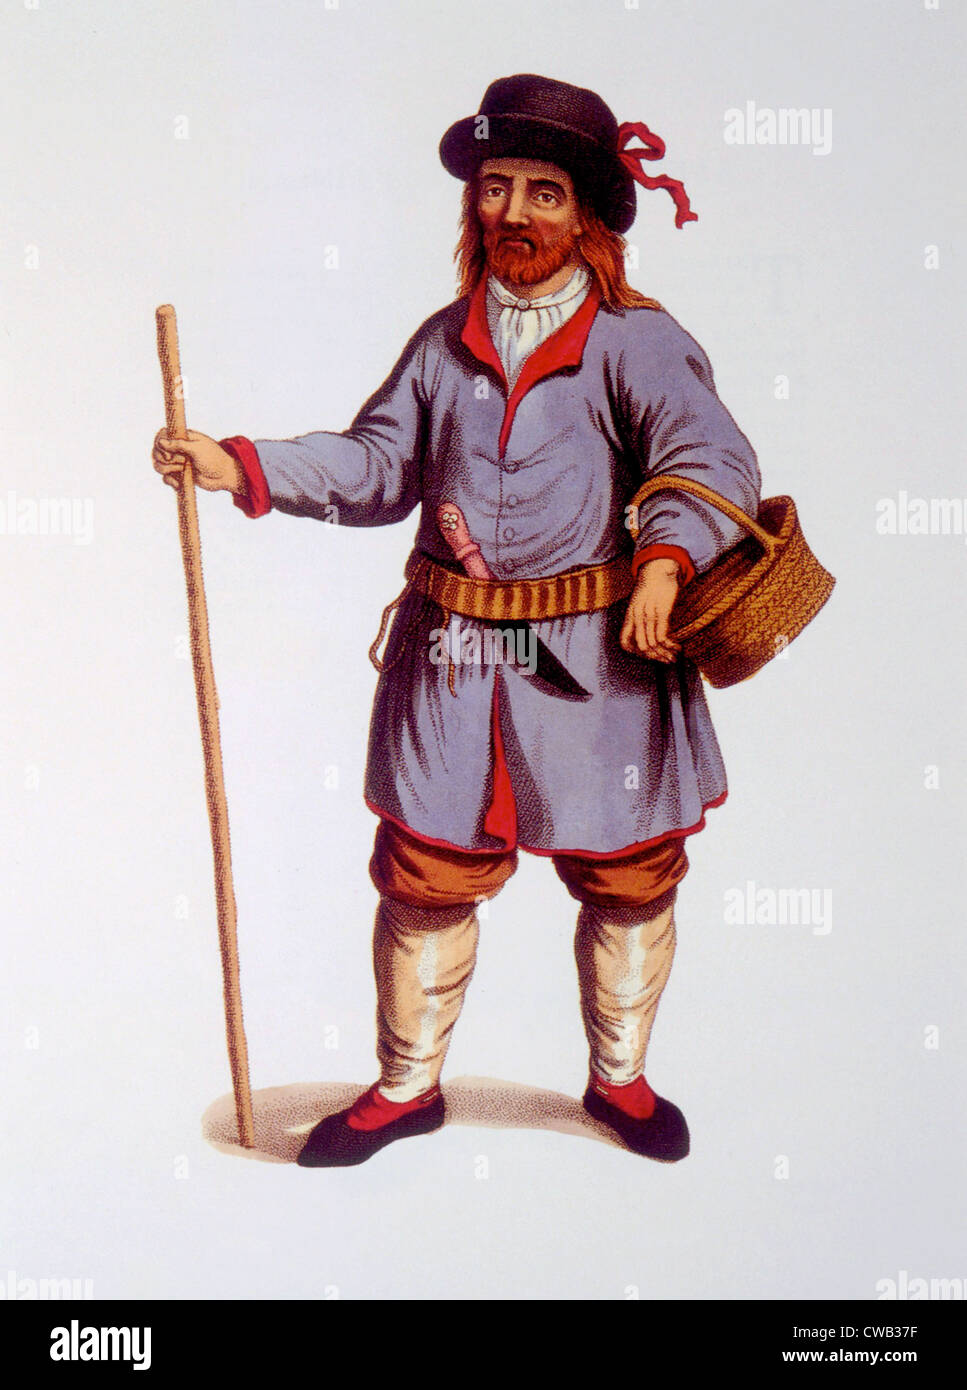 Peasant man of Finland. hand-colored engraving from Costumes of the Russian Empire, 1803. Stock Photo